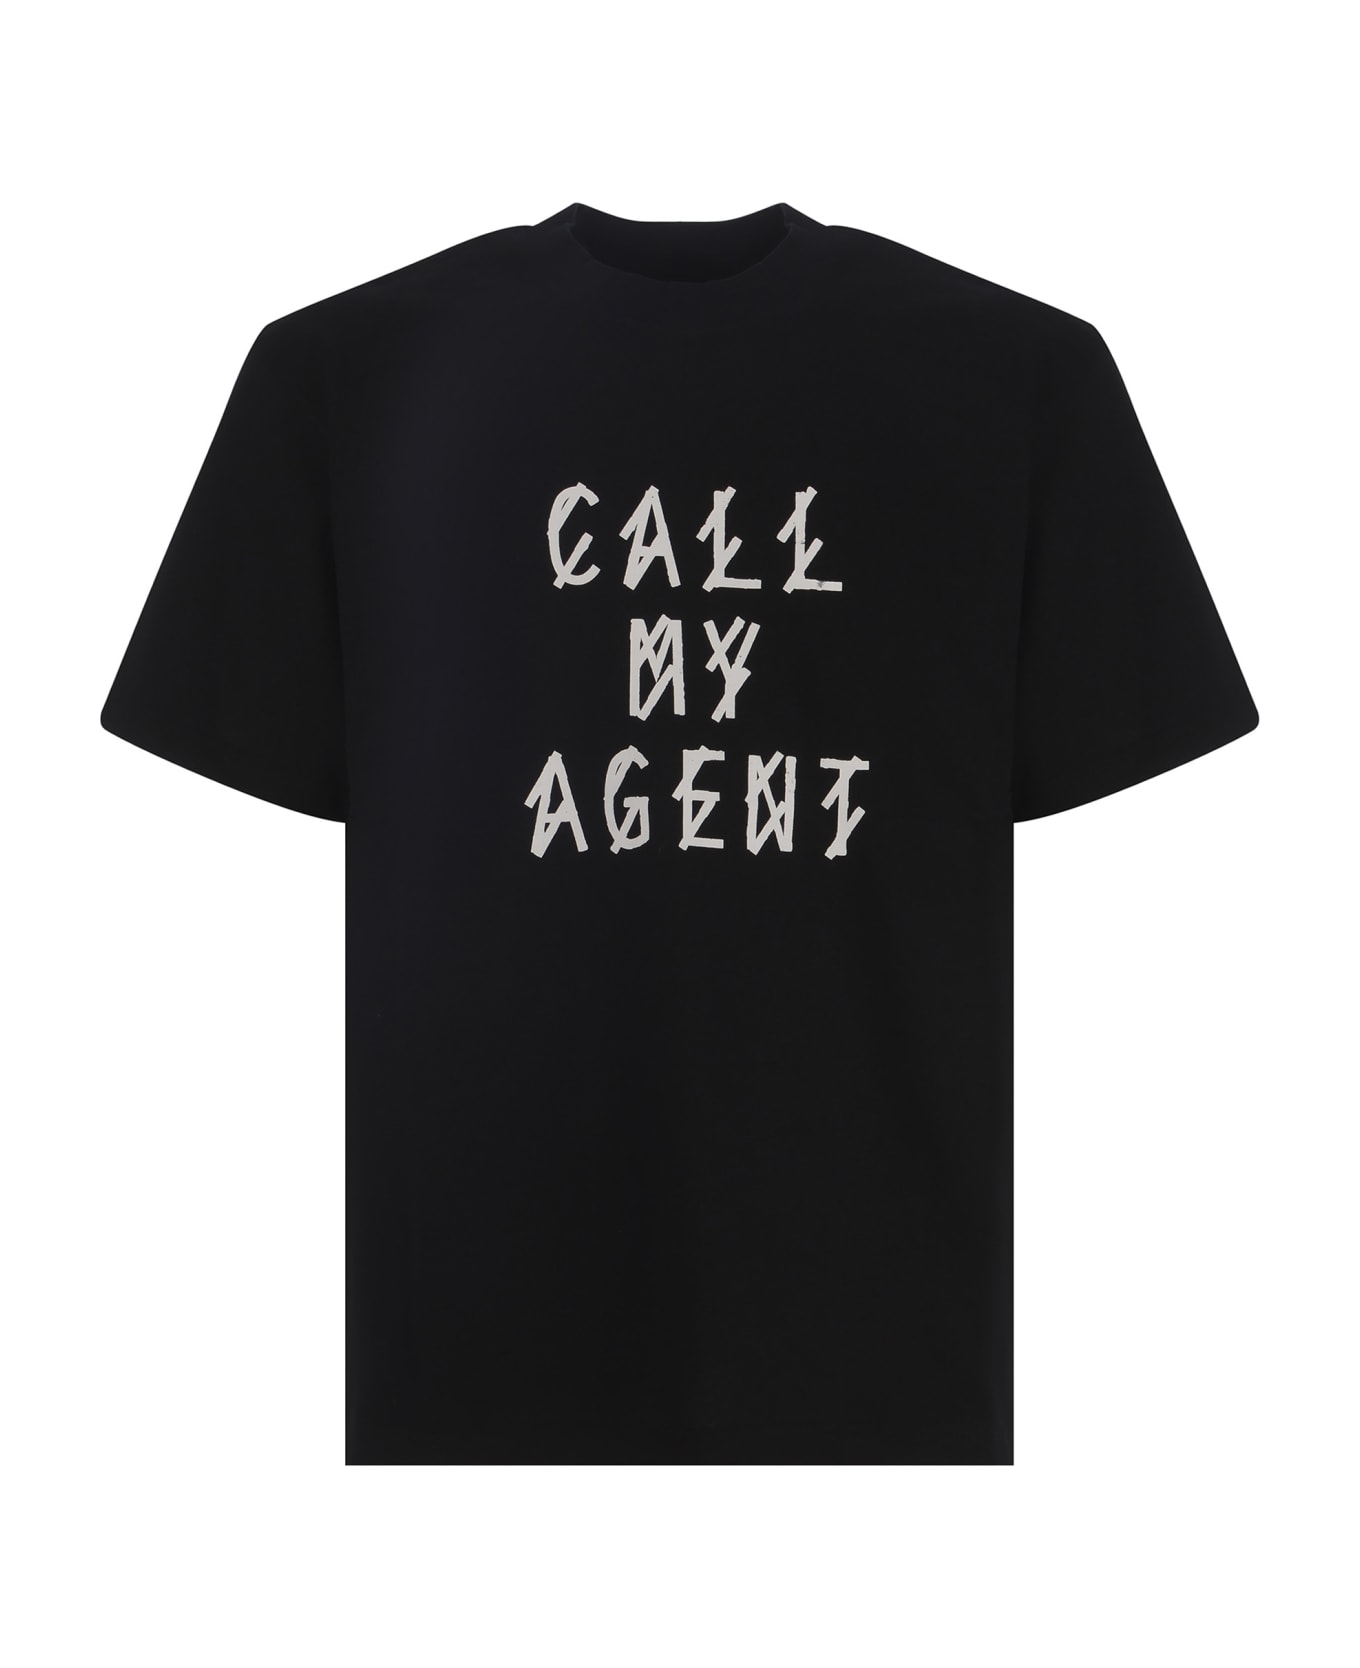 44 Label Group T-shirt 44 Label Group "agente" Made Of Cotton - Nero シャツ